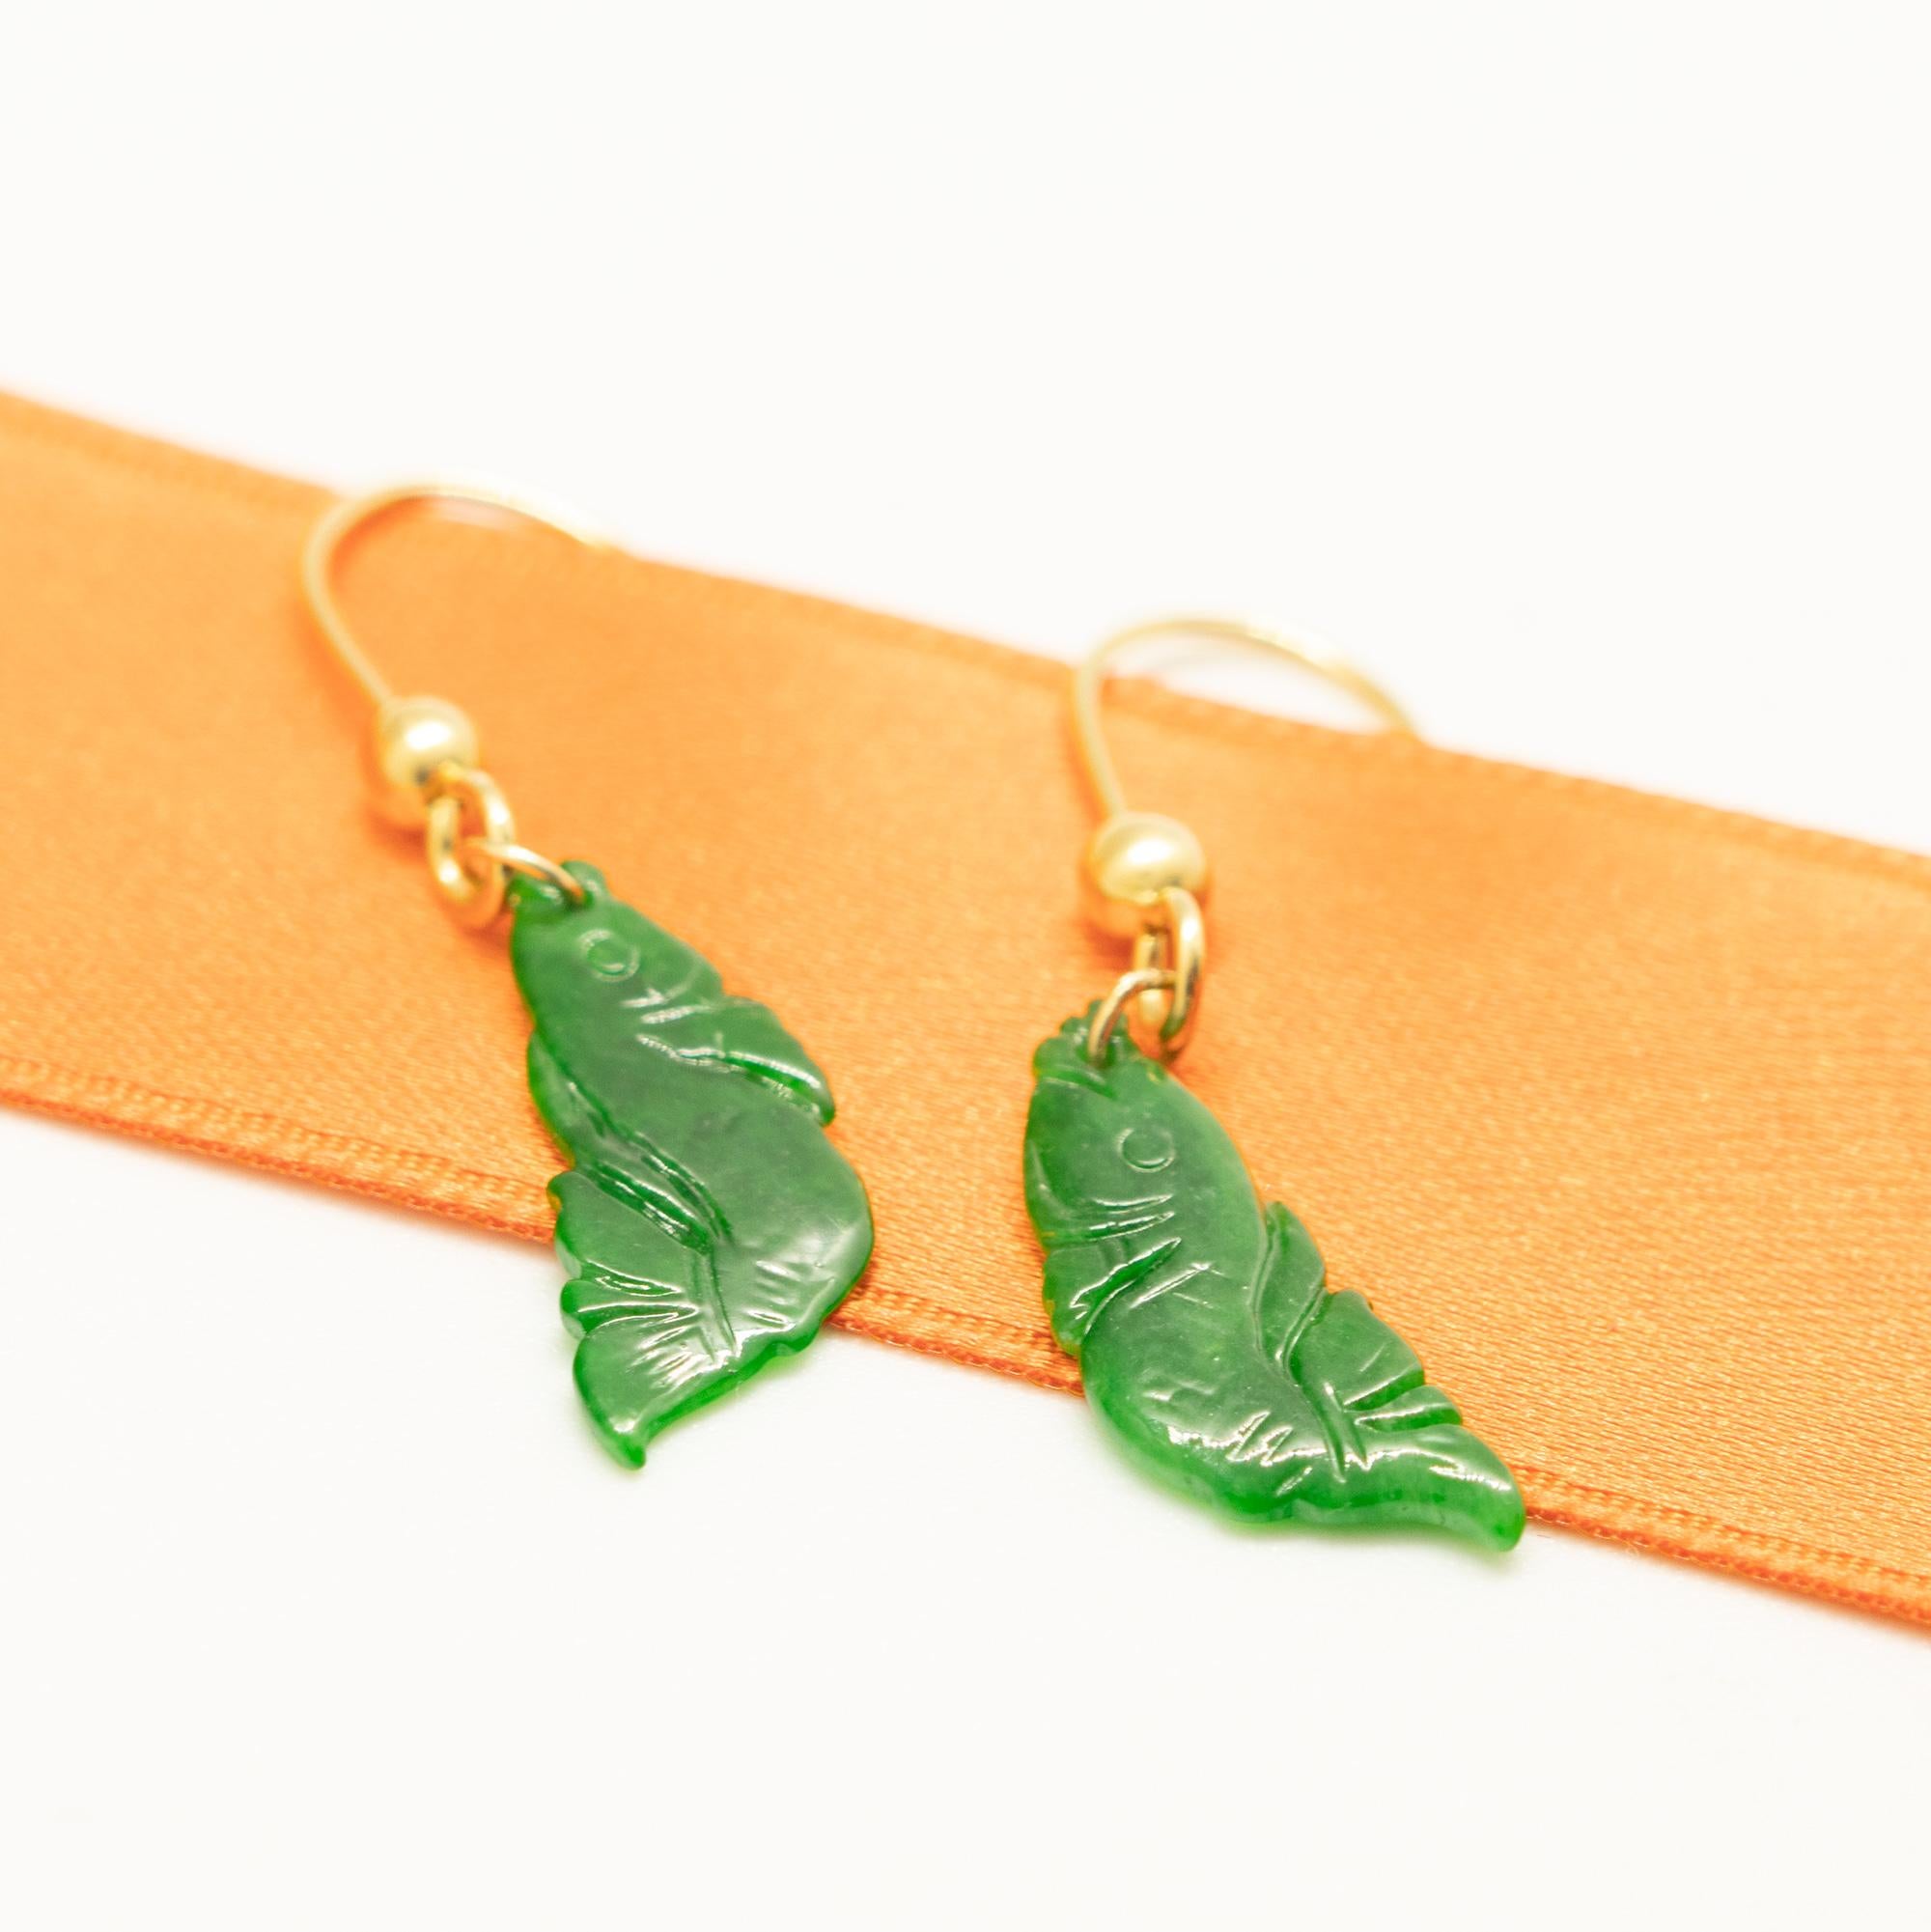 A stunning 9 karat yellow gold earrings ending in a unique natural carved jade stone. The green precious stone is carved in a fish shape with a flower tale. Long, dangle drop earrings created for a bold and delicate look. 
 
These earrings are